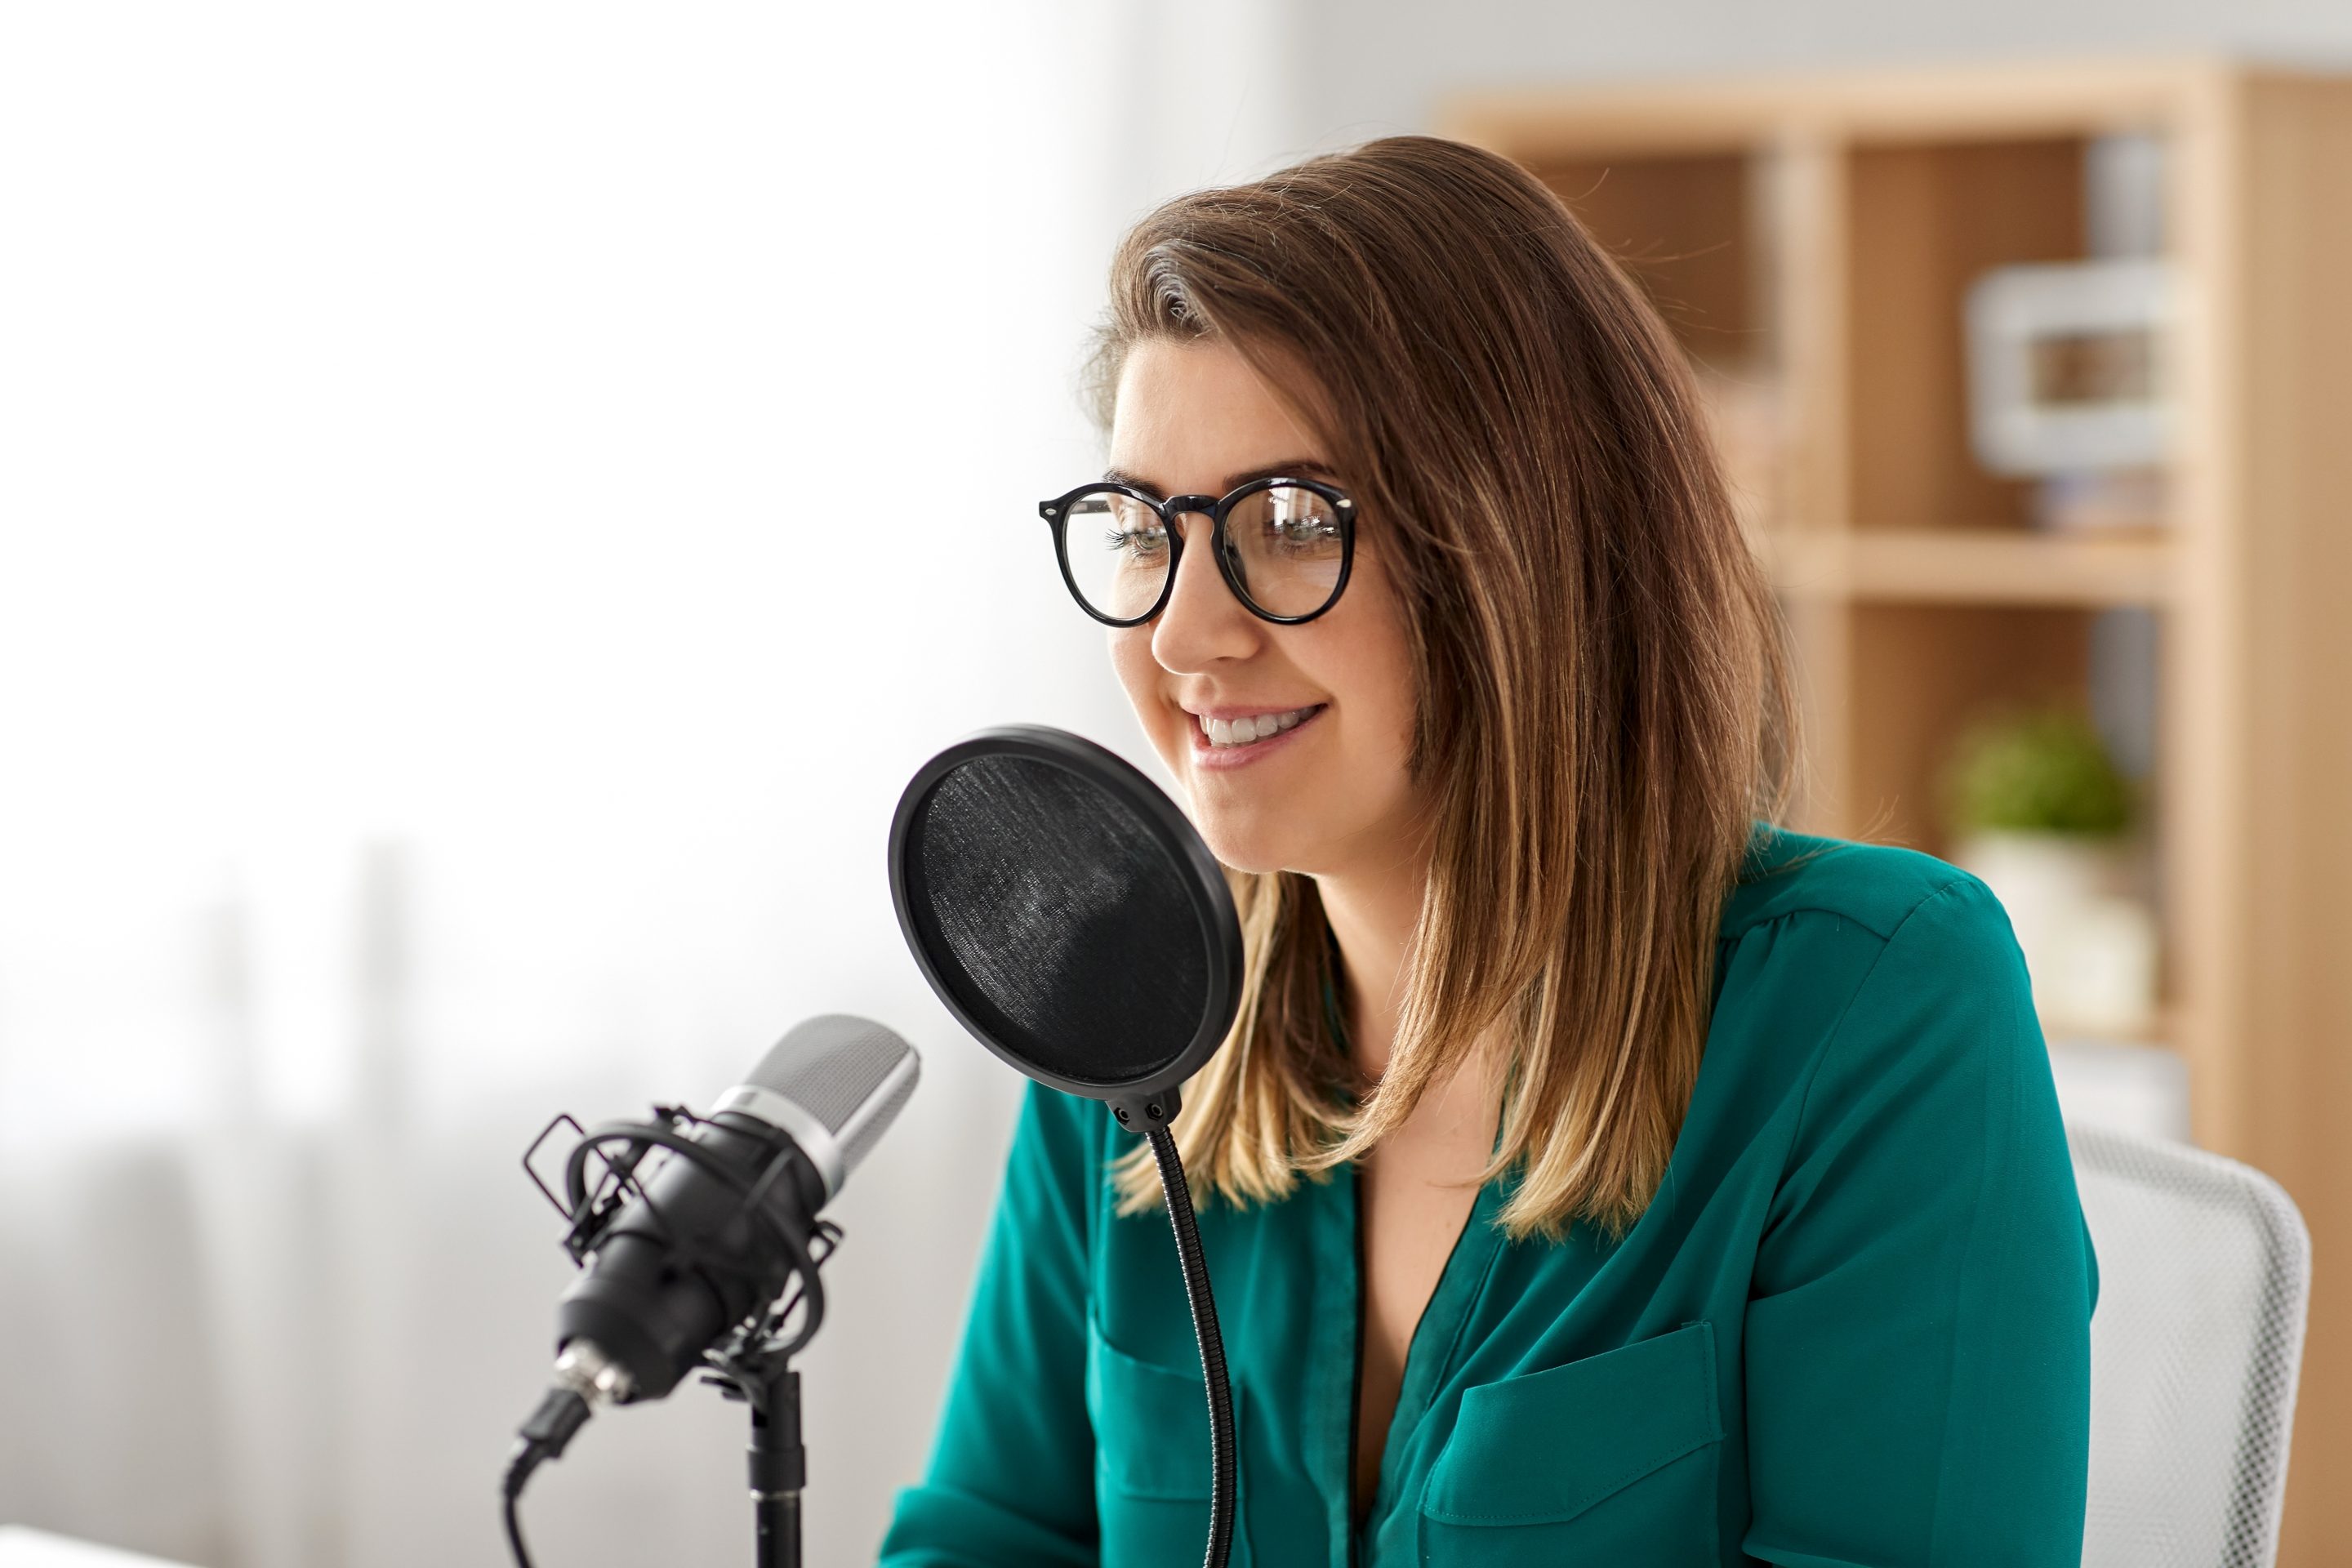 A Podcast Is The Final Piece To Your Digital Marketing Puzzle